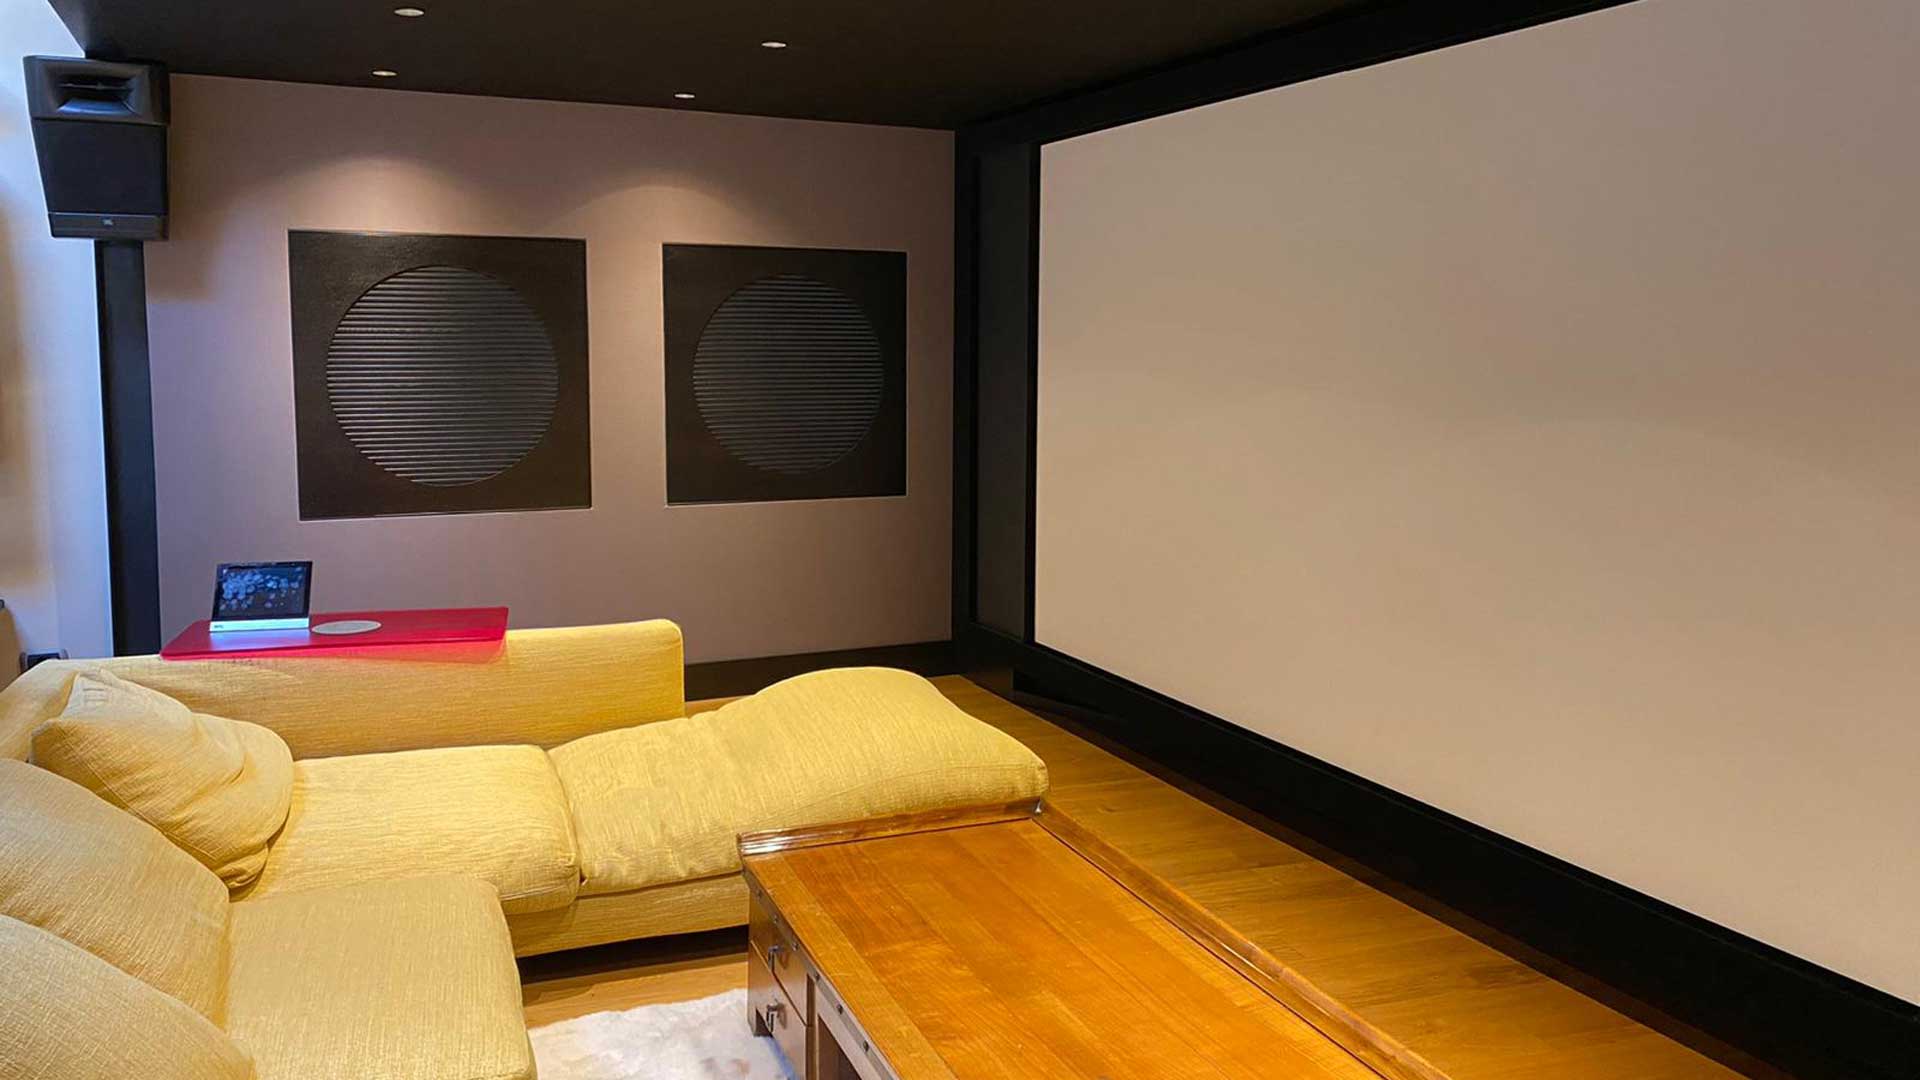 A home cinema project: the cinema lives at home Really!